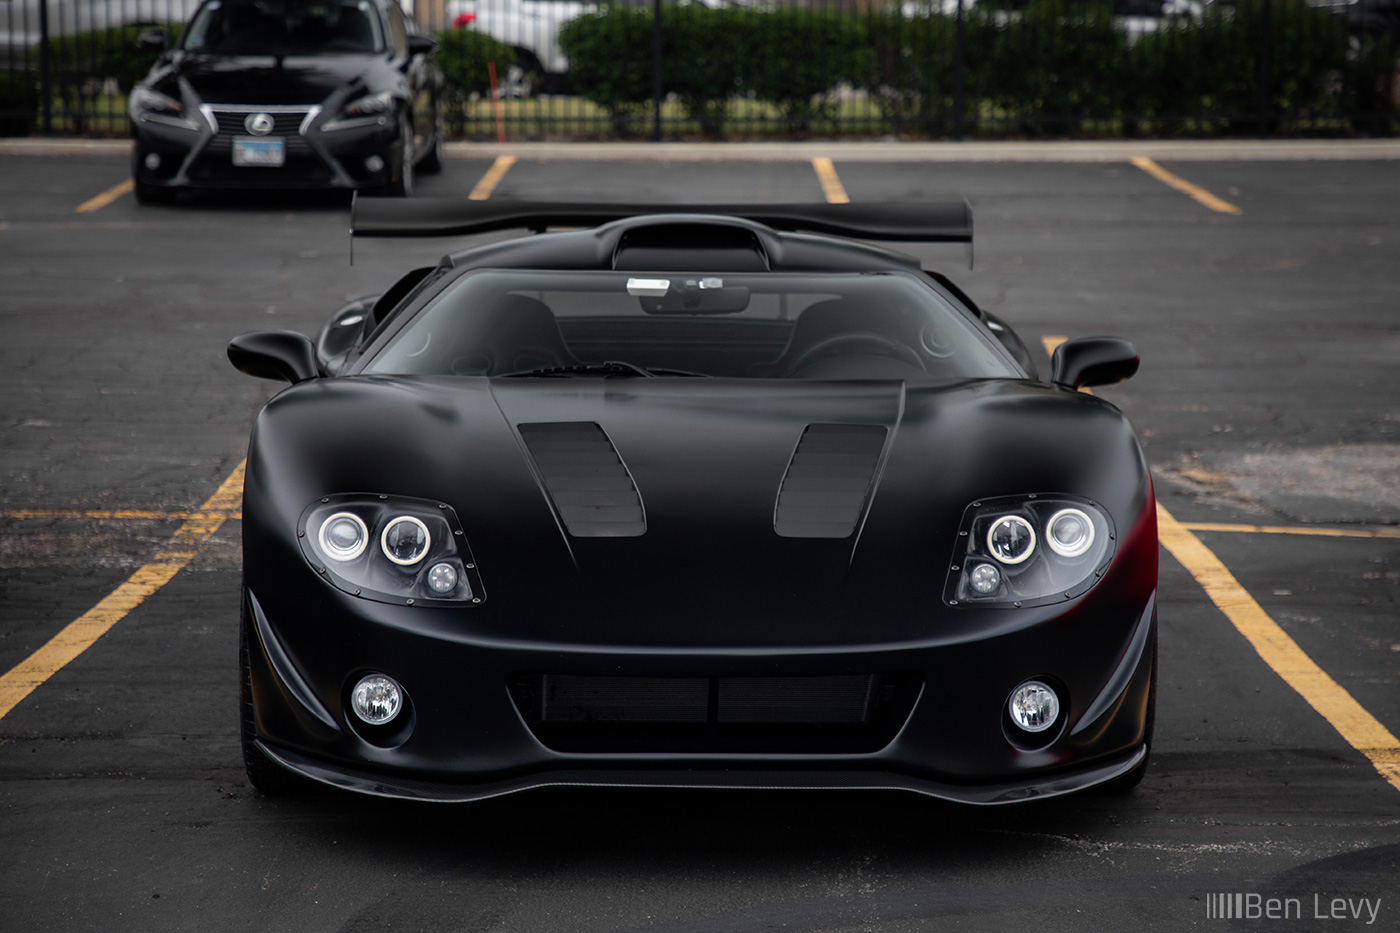 Matte Black GTM Supercar at a Cars and Coffee in Chicago